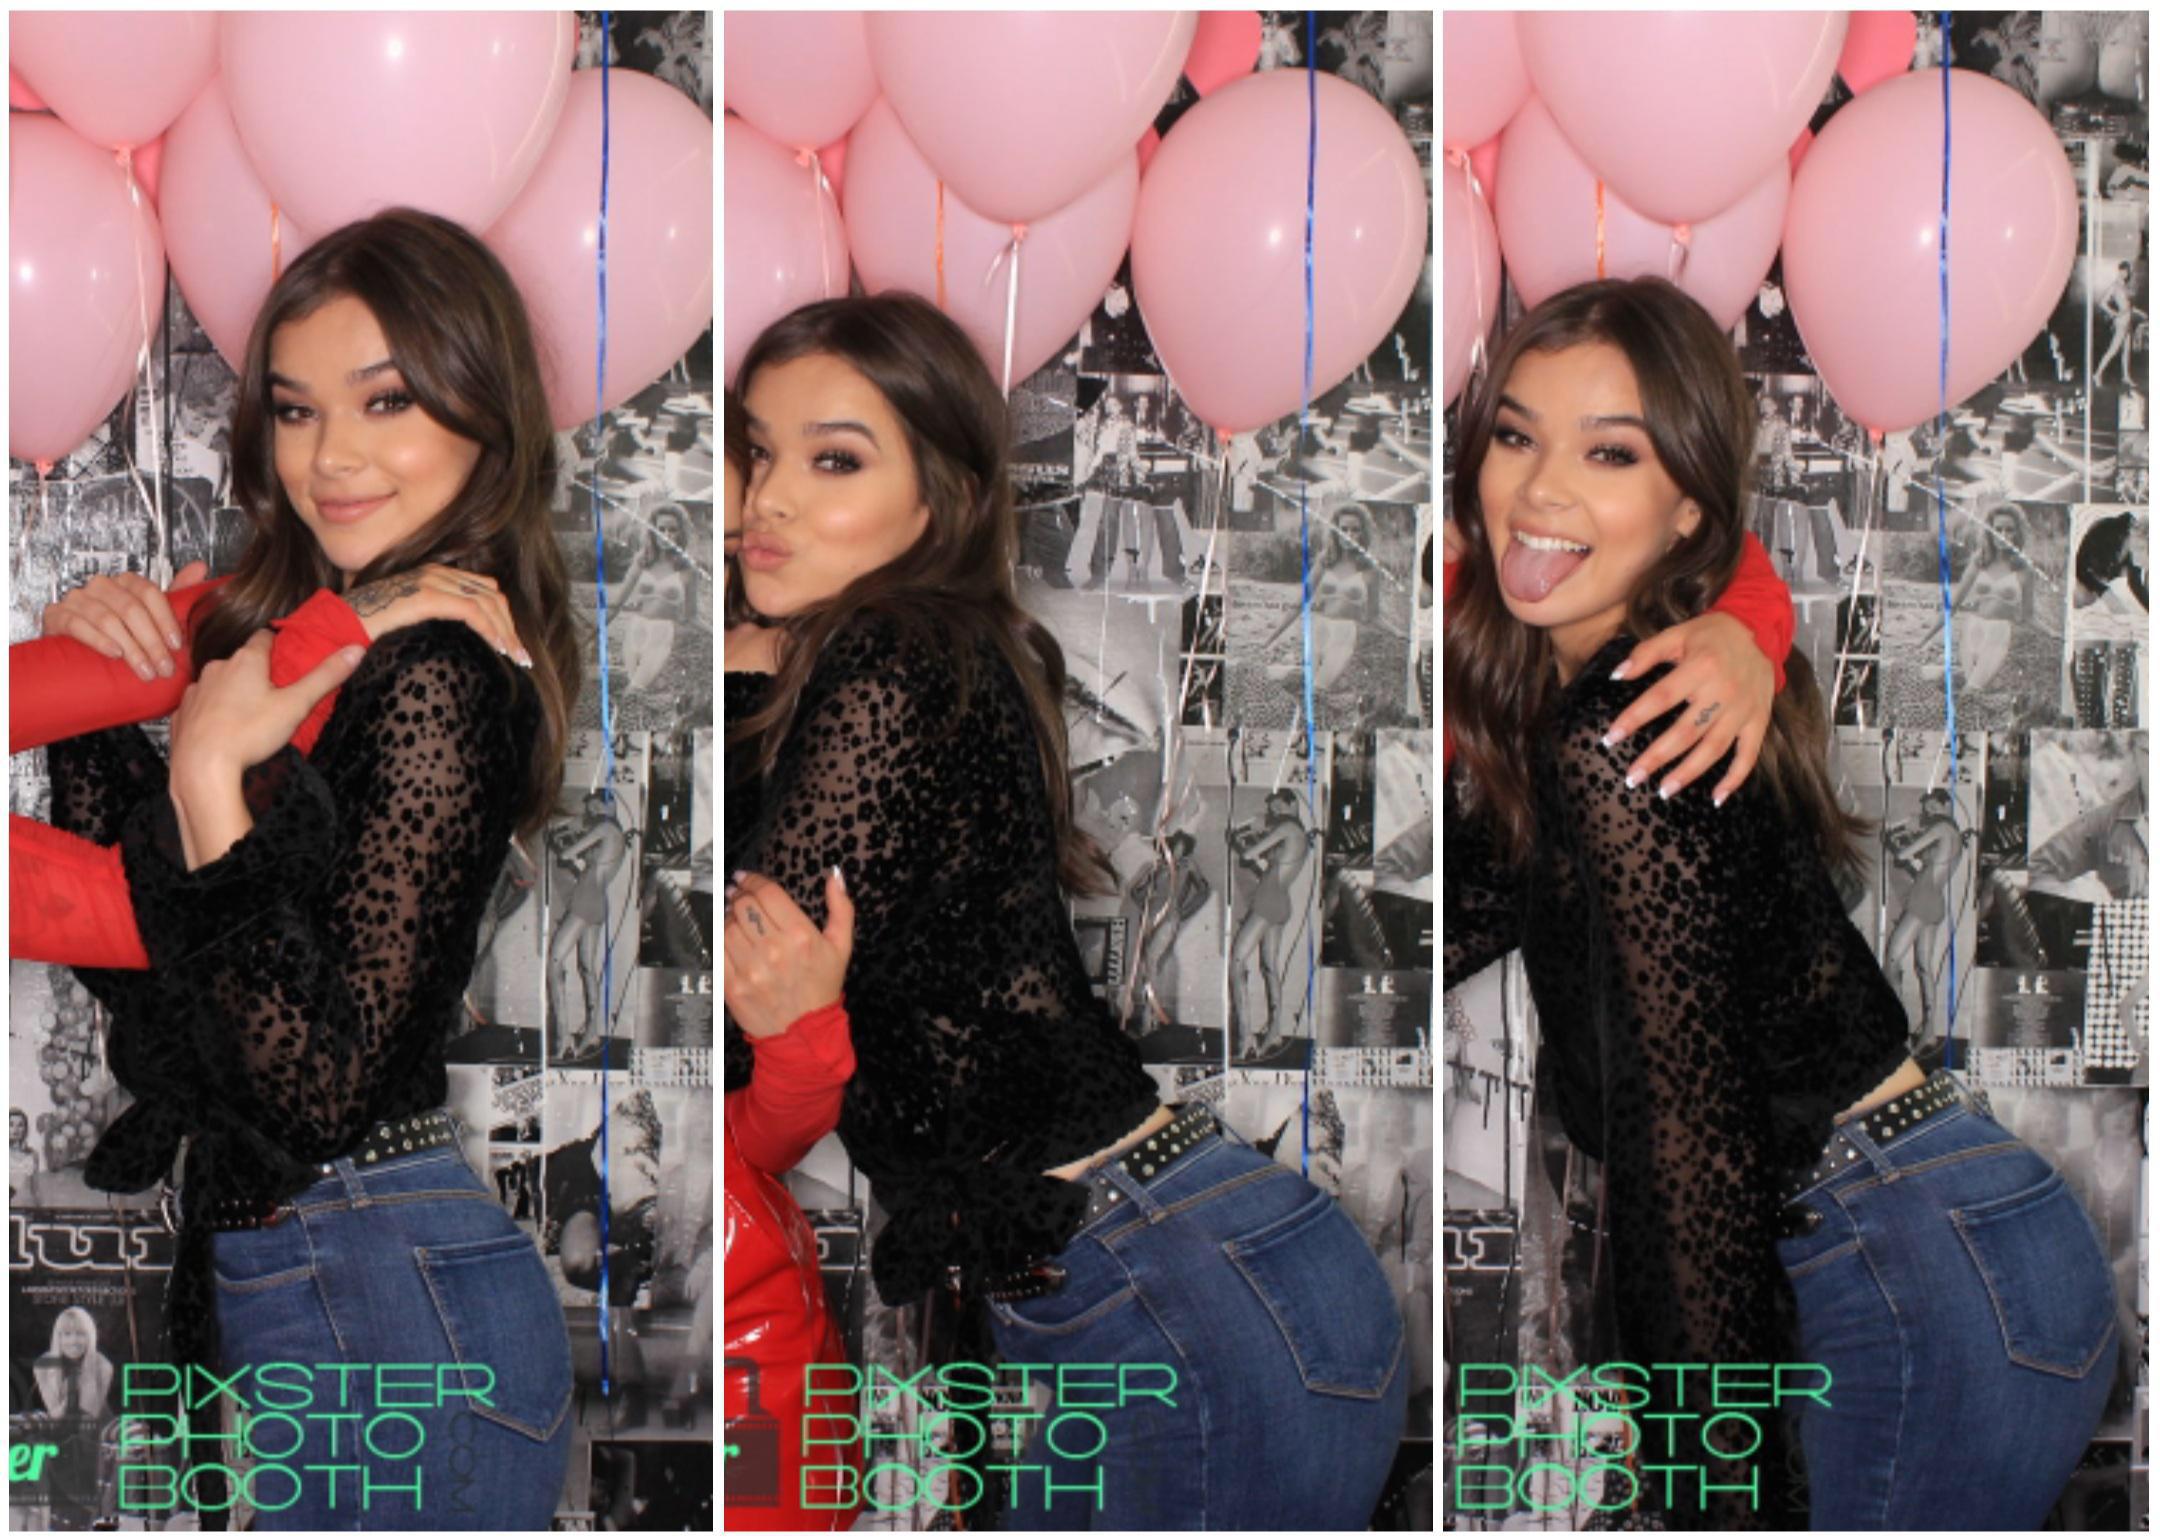 Hailee Steinfeld can sit that plump ass on my face